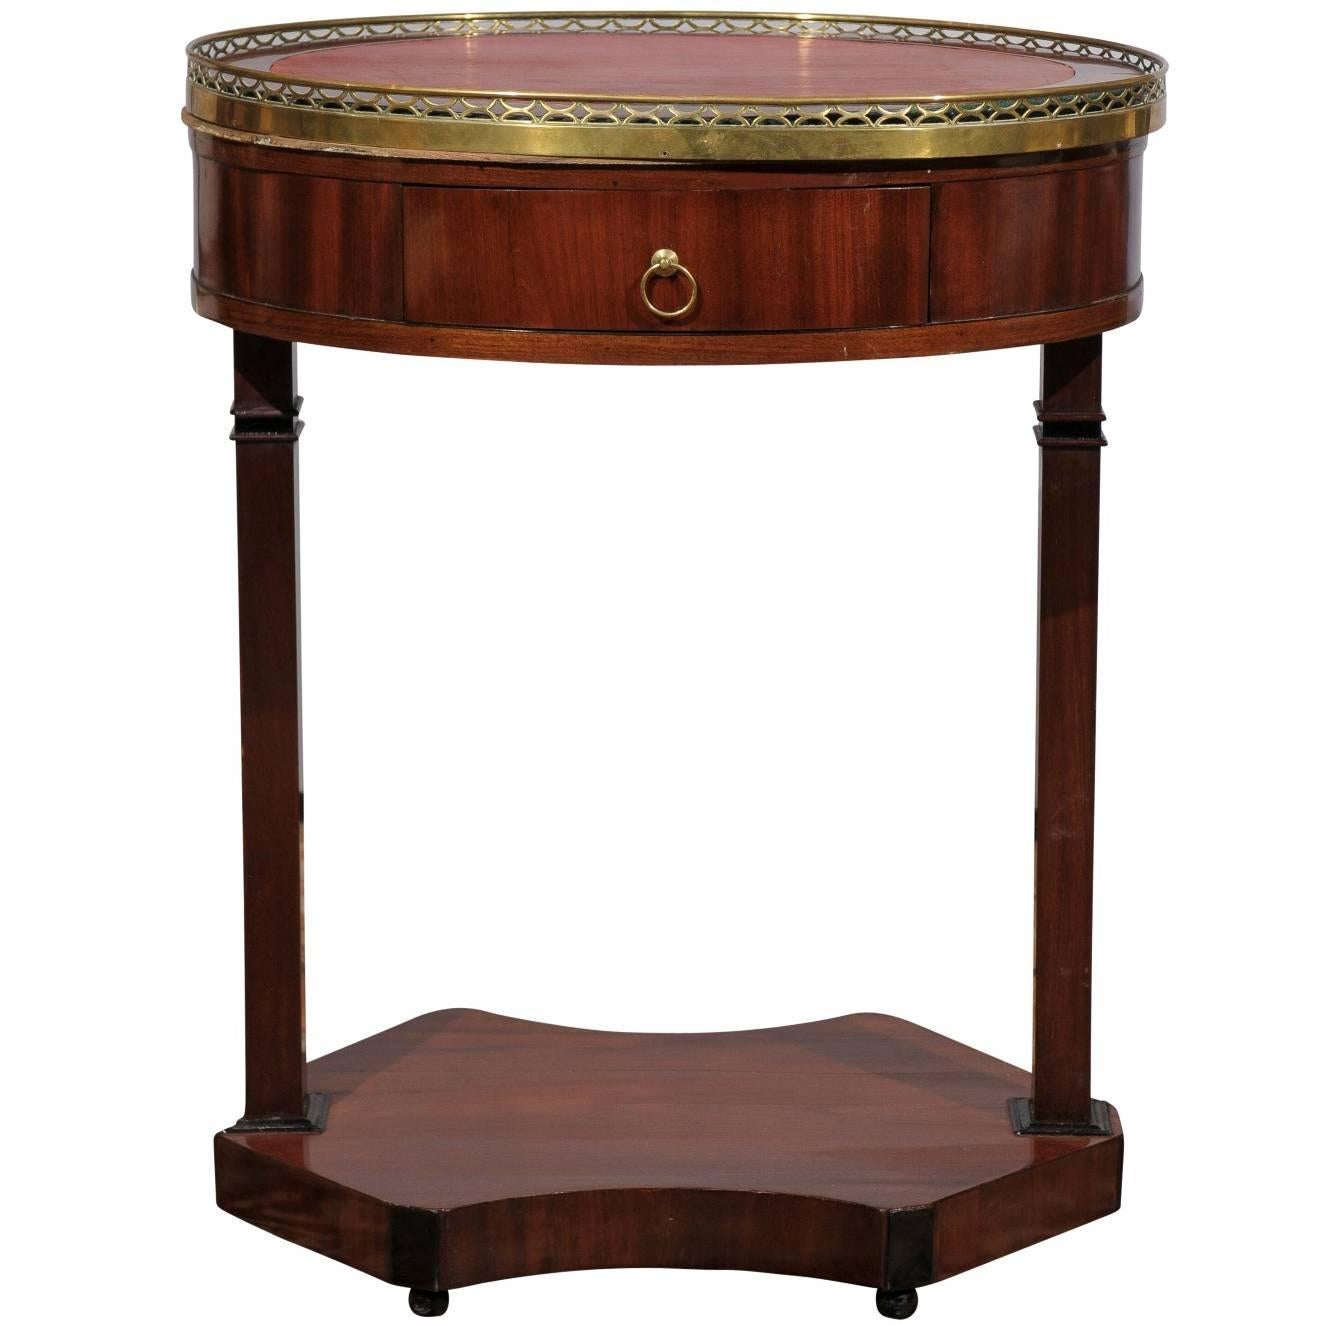 19th Century French Empire Mahogany Oval Table with Marble Top and Gallery